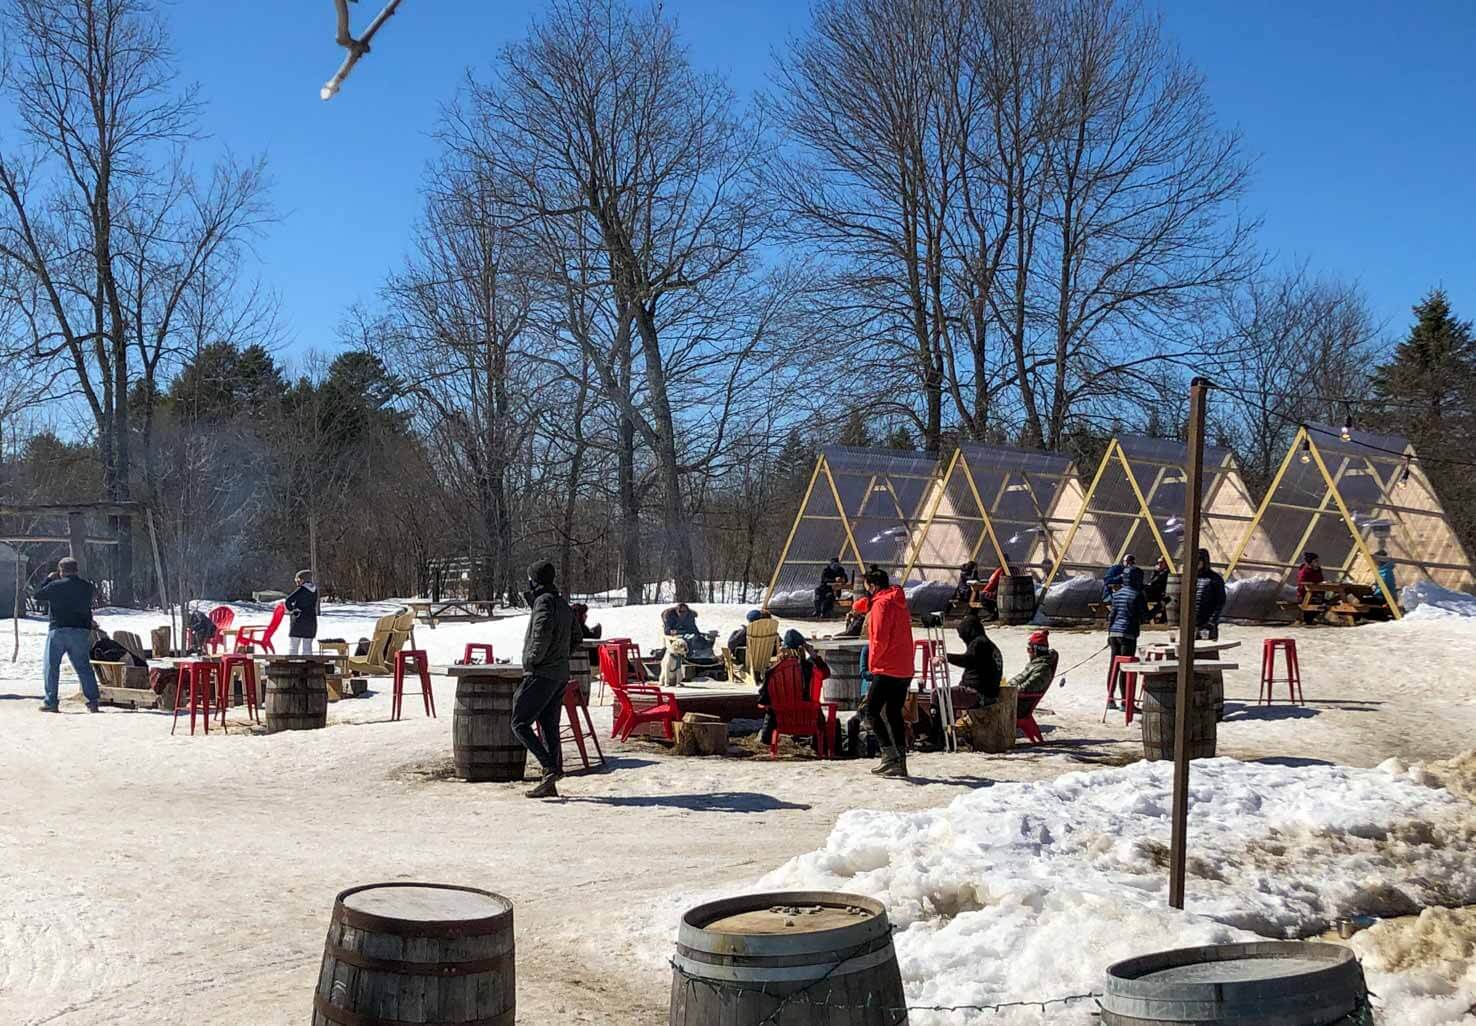 People gathered around a fire pit on a sunny winter day with snow on the ground